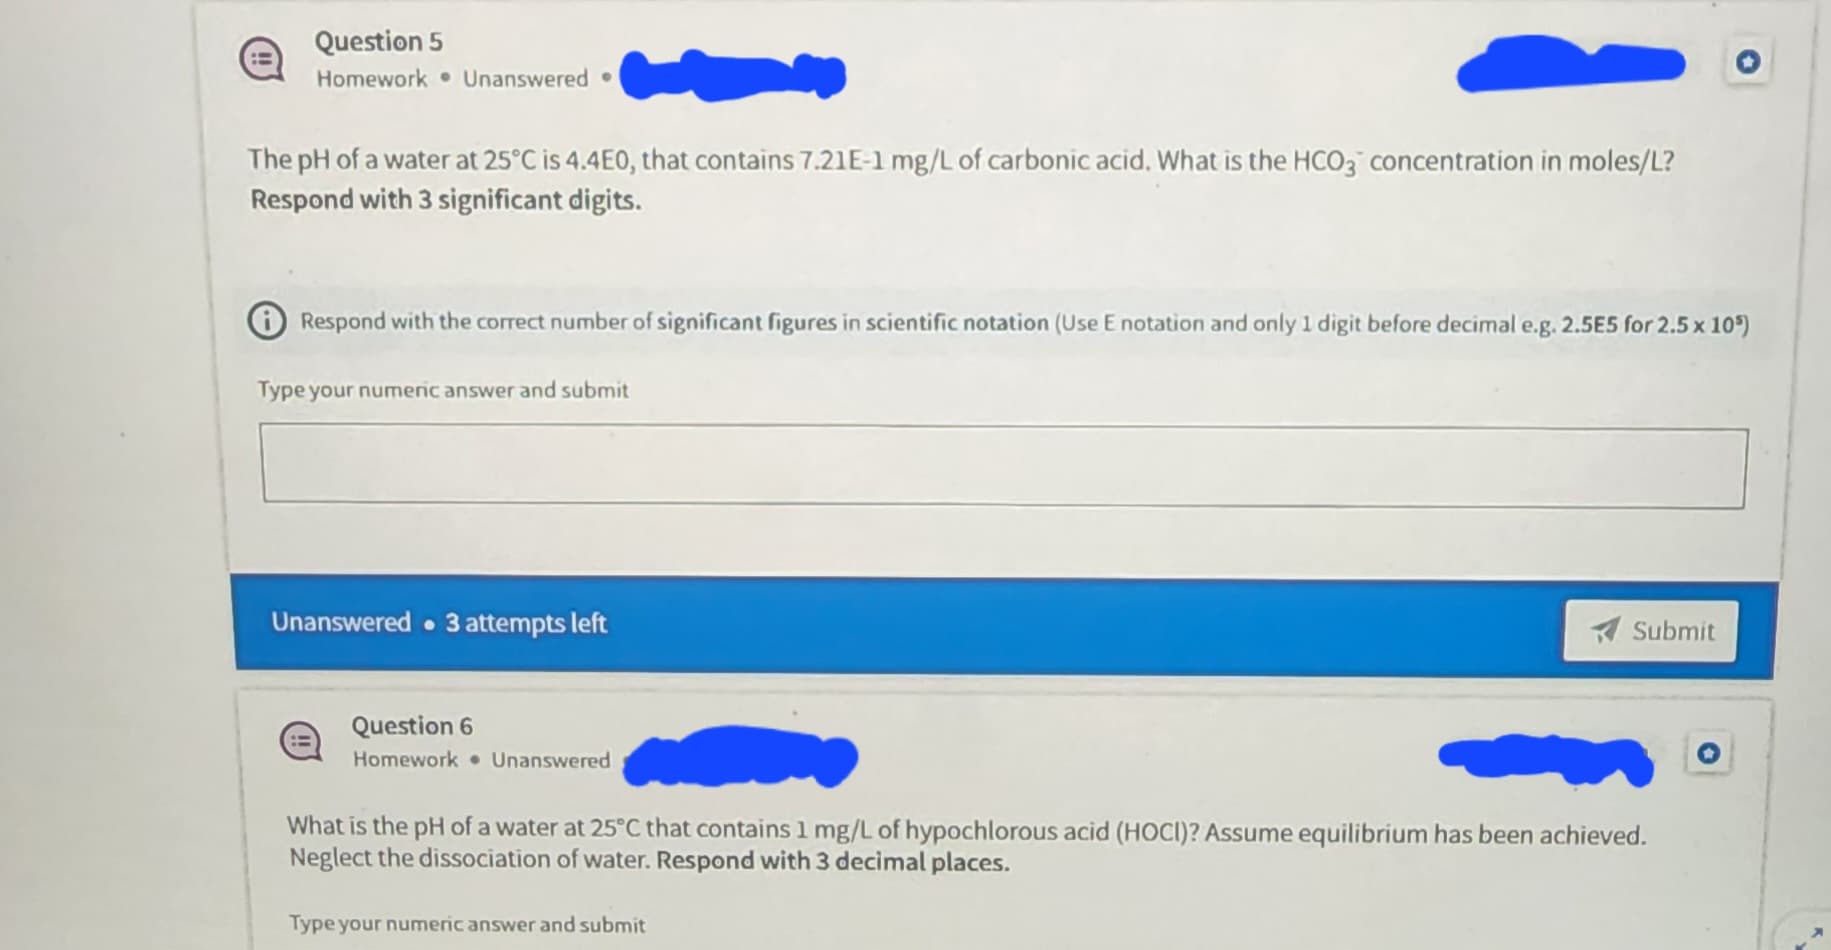 Question 5
Homework Unanswered.
The pH of a water at 25°C is 4.4E0, that contains 7.21E-1 mg/L of carbonic acid. What is the HCO3 concentration in moles/L?
Respond with 3 significant digits.
Respond with the correct number of significant figures in scientific notation (Use E notation and only 1 digit before decimal e.g. 2.5E5 for 2.5 x 105)
Type your numeric answer and submit
Unanswered 3 attempts left
Question 6
Homework Unanswered
Submit
What is the pH of a water at 25°C that contains 1 mg/L of hypochlorous acid (HOCI)? Assume equilibrium has been achieved.
Neglect the dissociation of water. Respond with 3 decimal places.
Type your numeric answer and submit